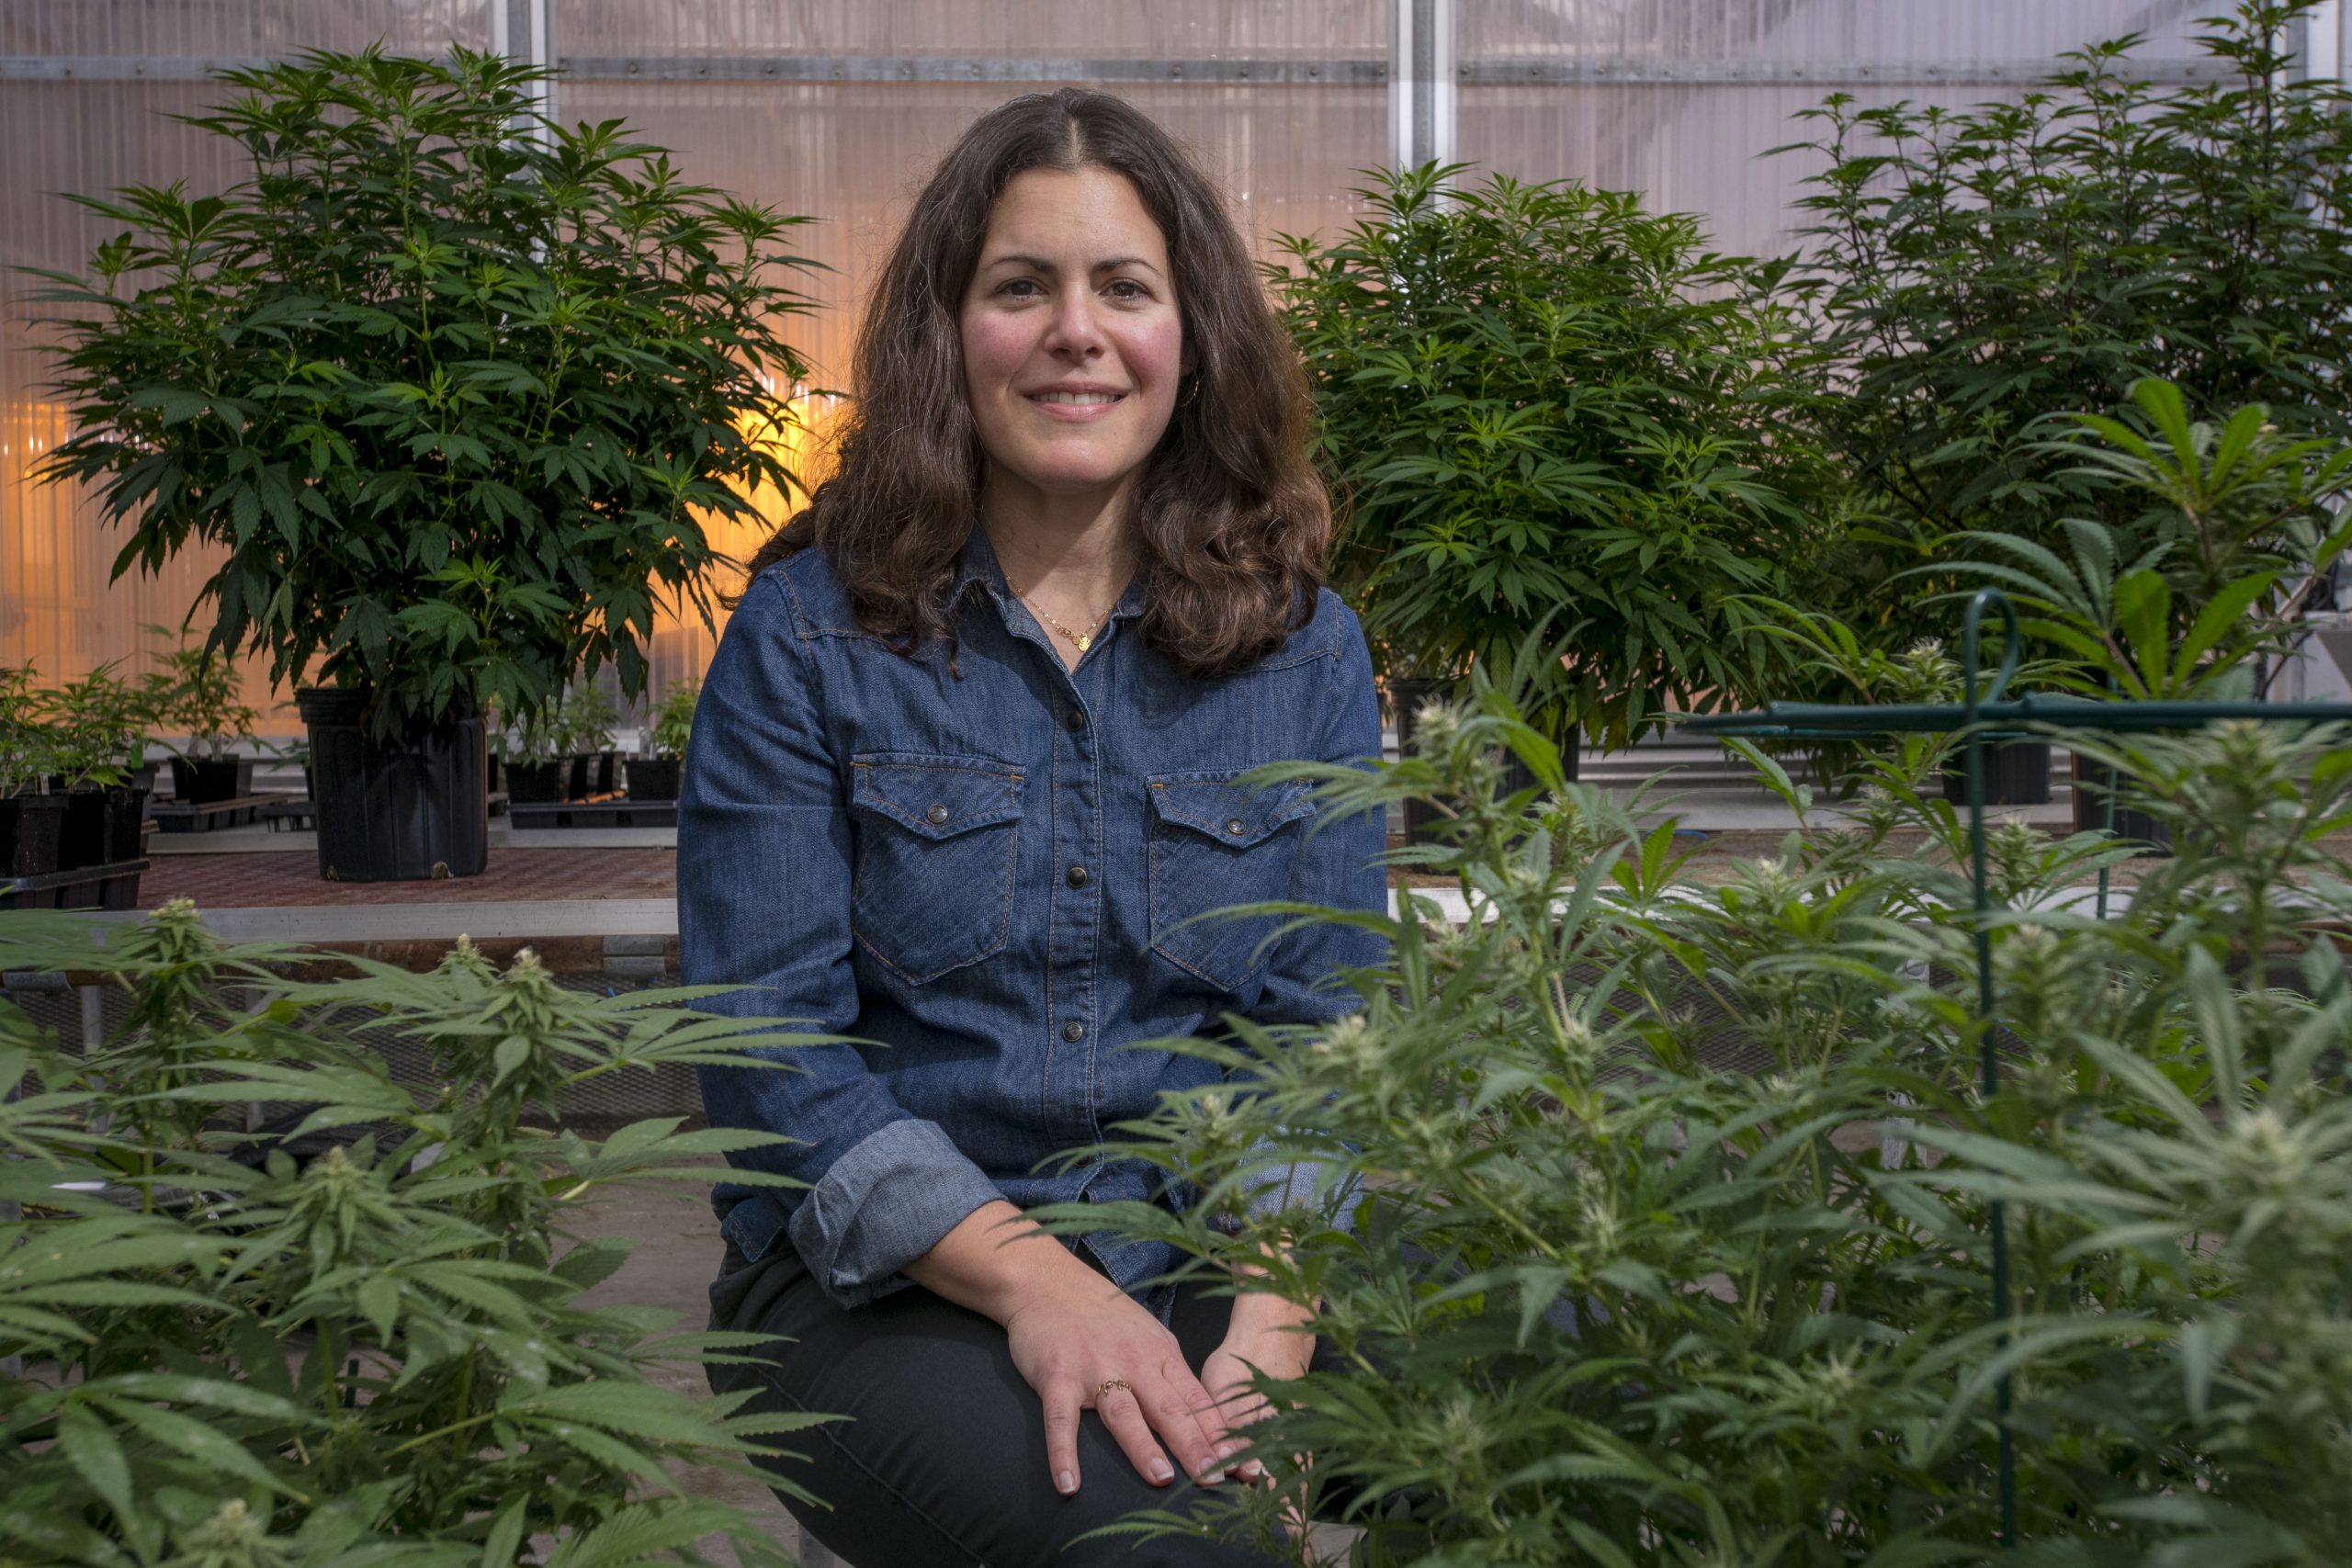 Smiling woman sitting in greenhouse amongst cannabis plants